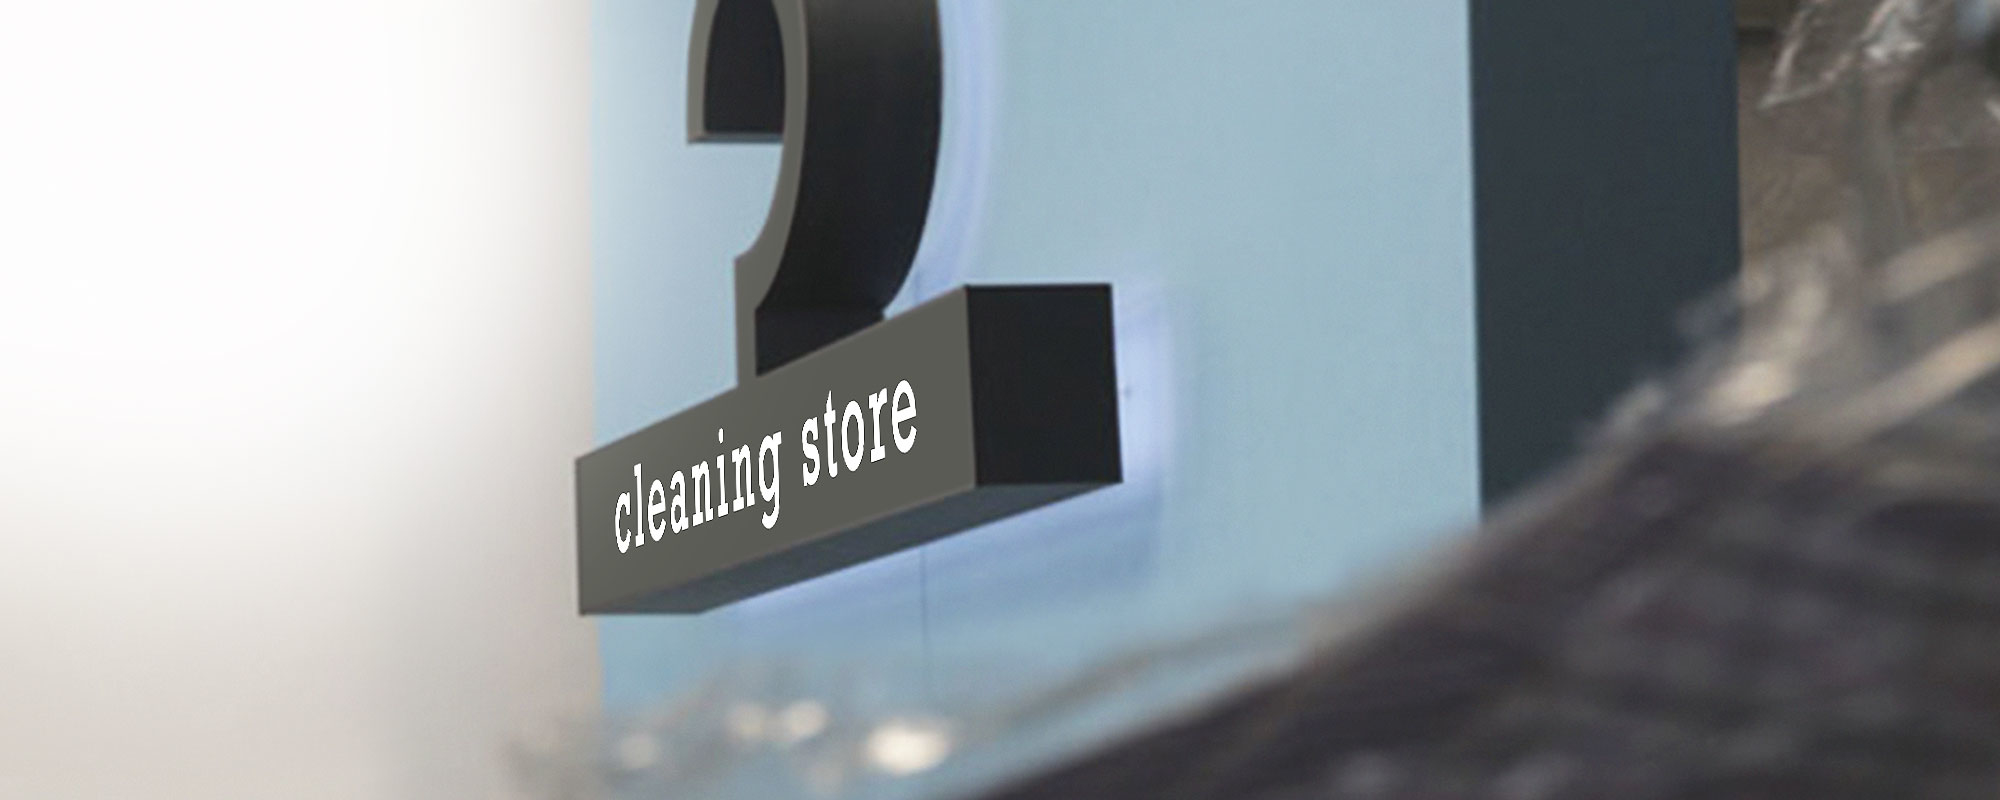 Cleaning Store